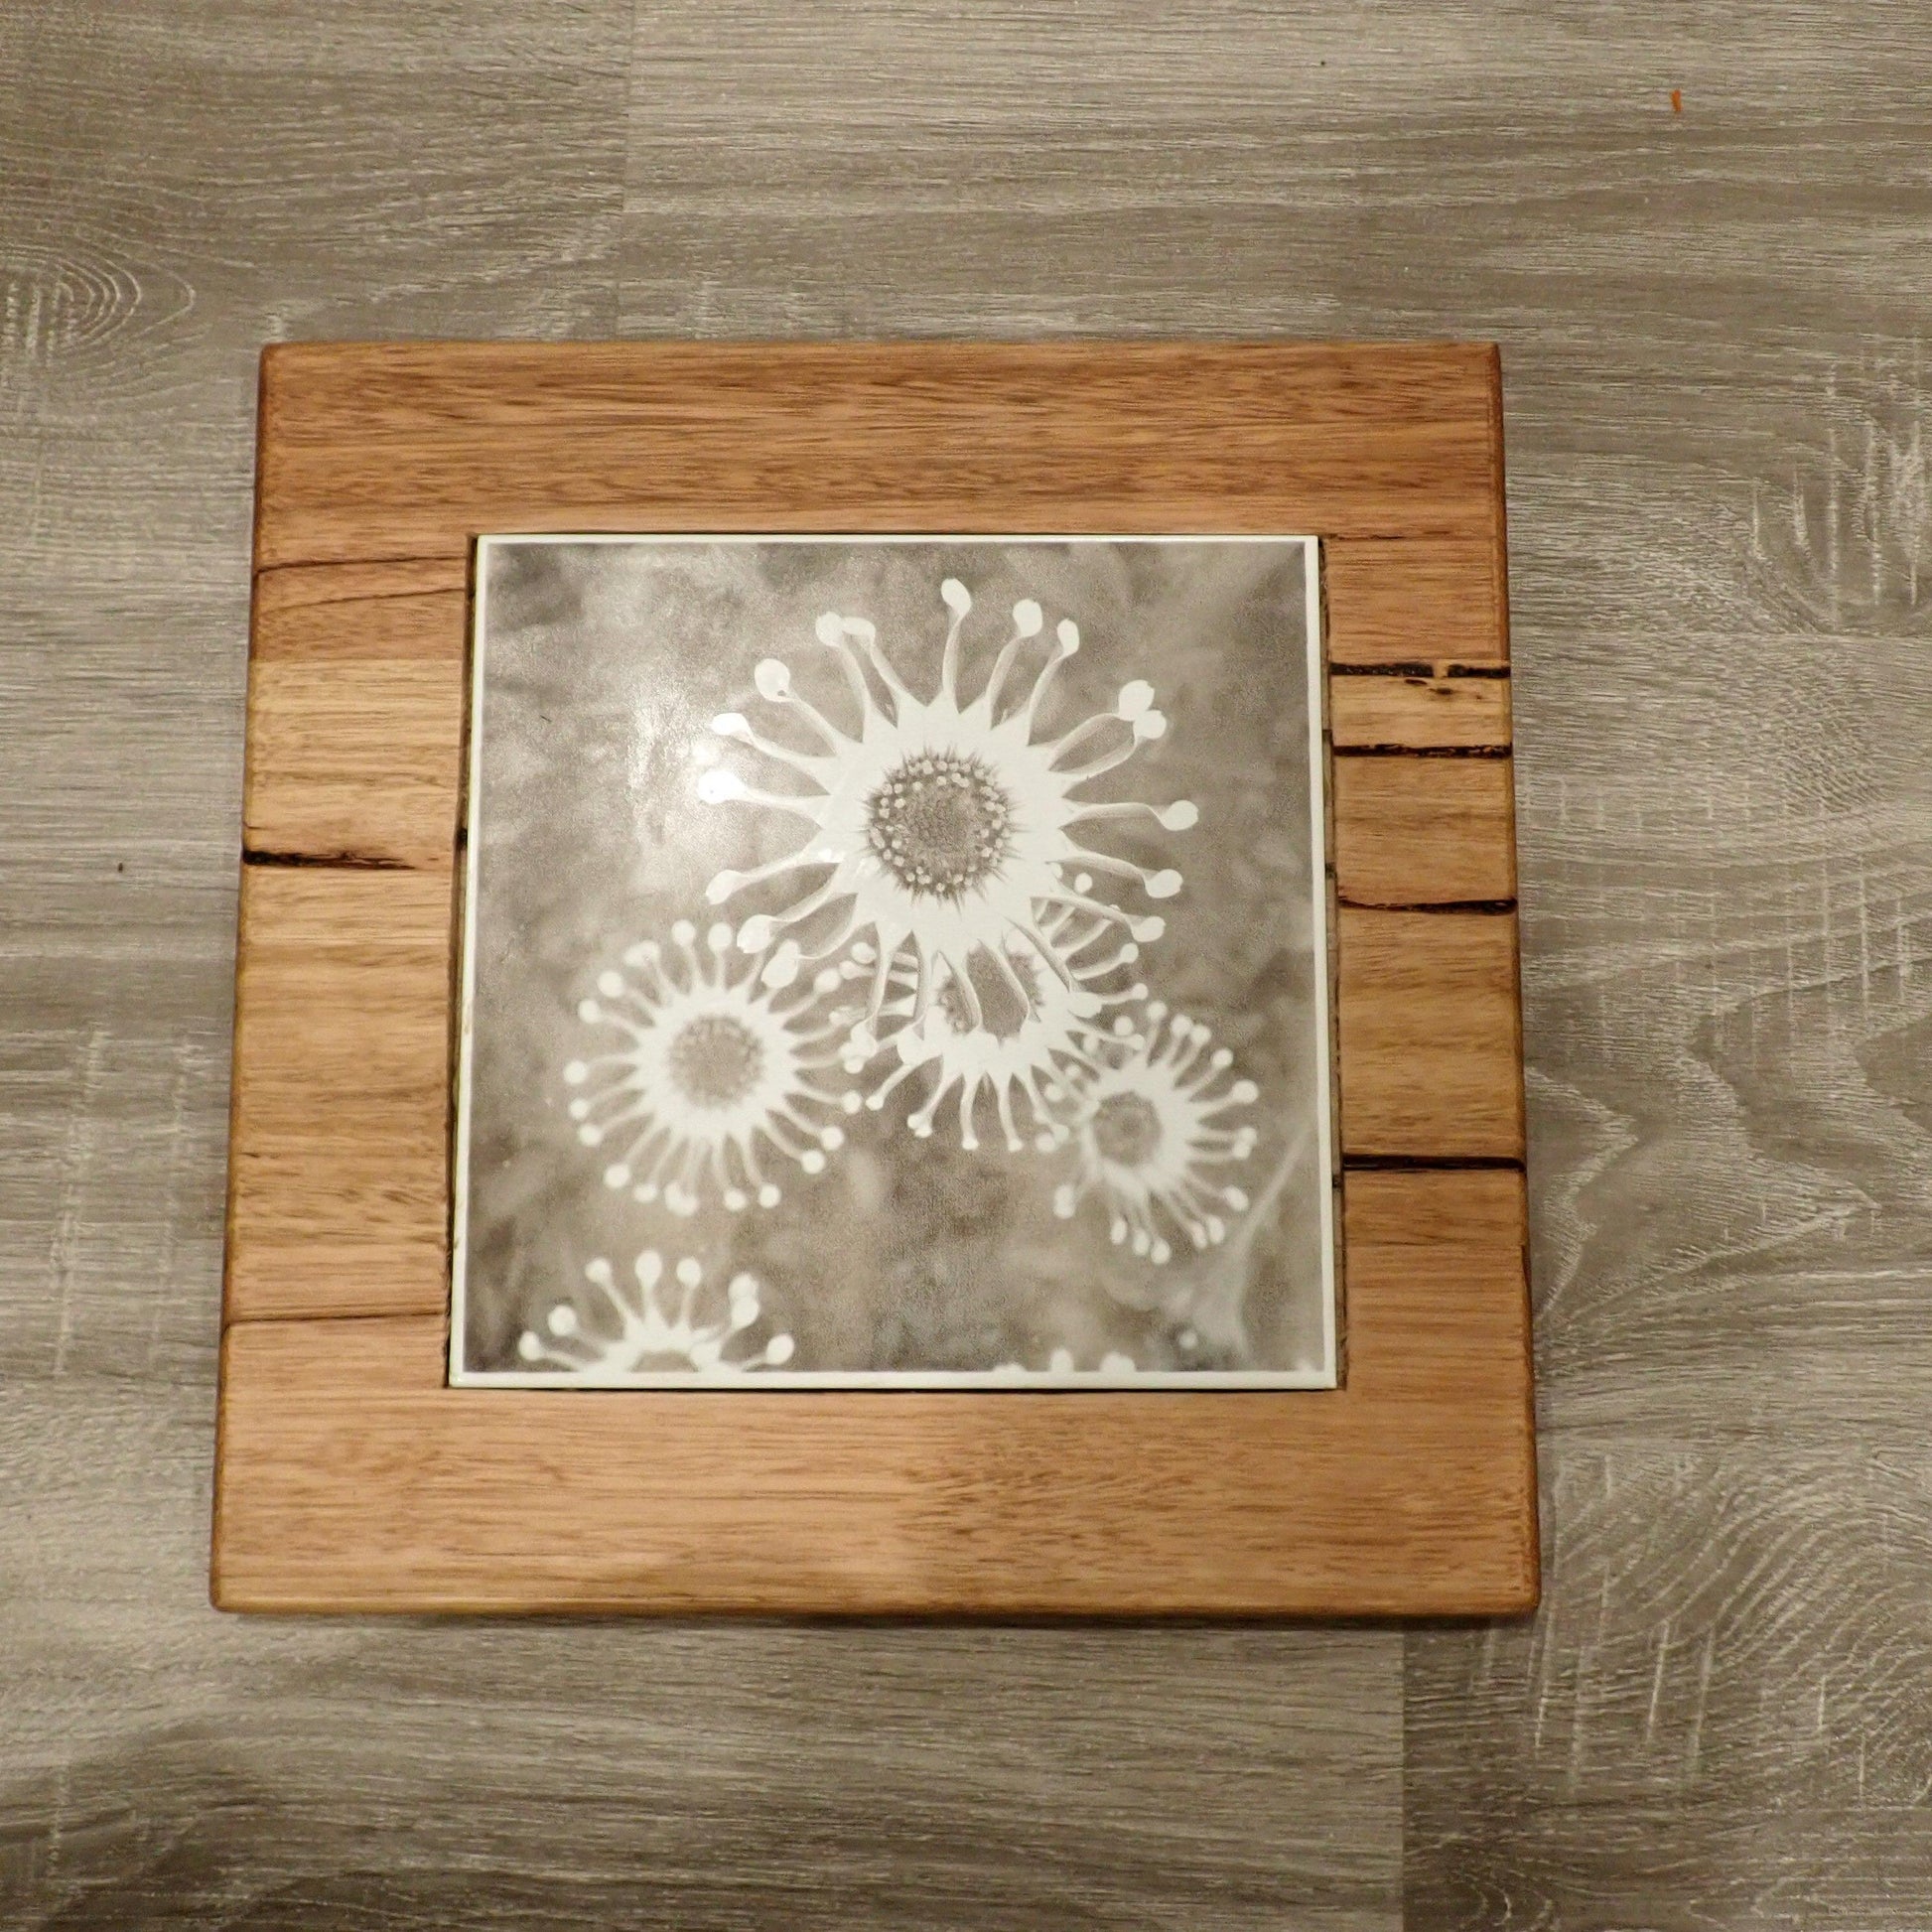 Tile and Timber Heat Pad - African Daisy 'Spider White' On Tasmanian Oak - Burning Man Designs